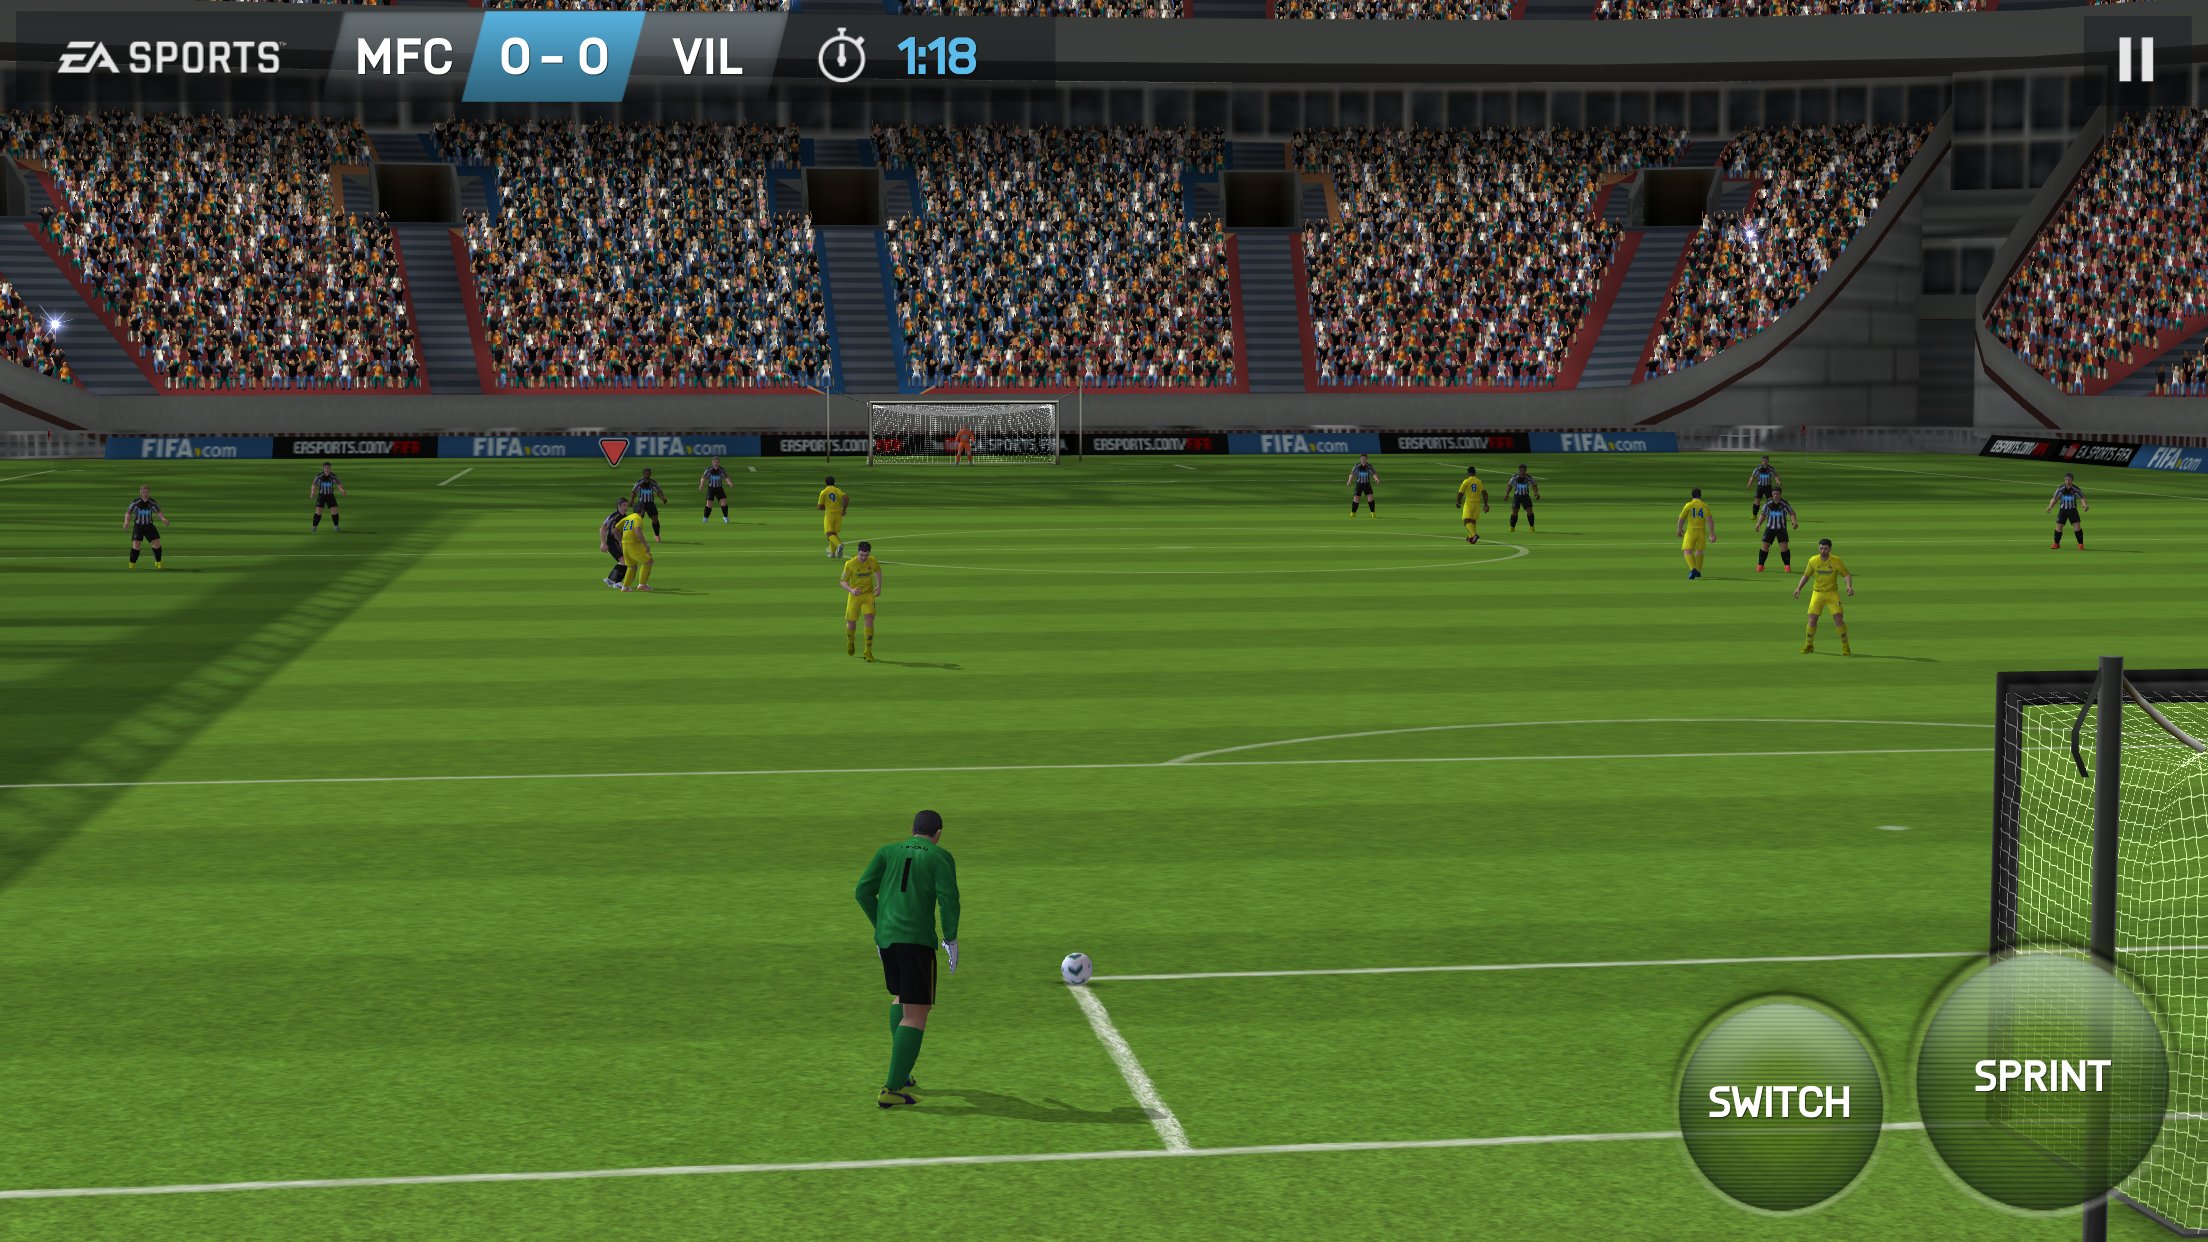 Best Games Android - FIFA Mobile Soccer (v 5.1.1) After FIFA 15, FIFA 16  and FIFA 17, EA Sports developed a new Soccer game- FIFA Mobile Soccer. You  can build and manage